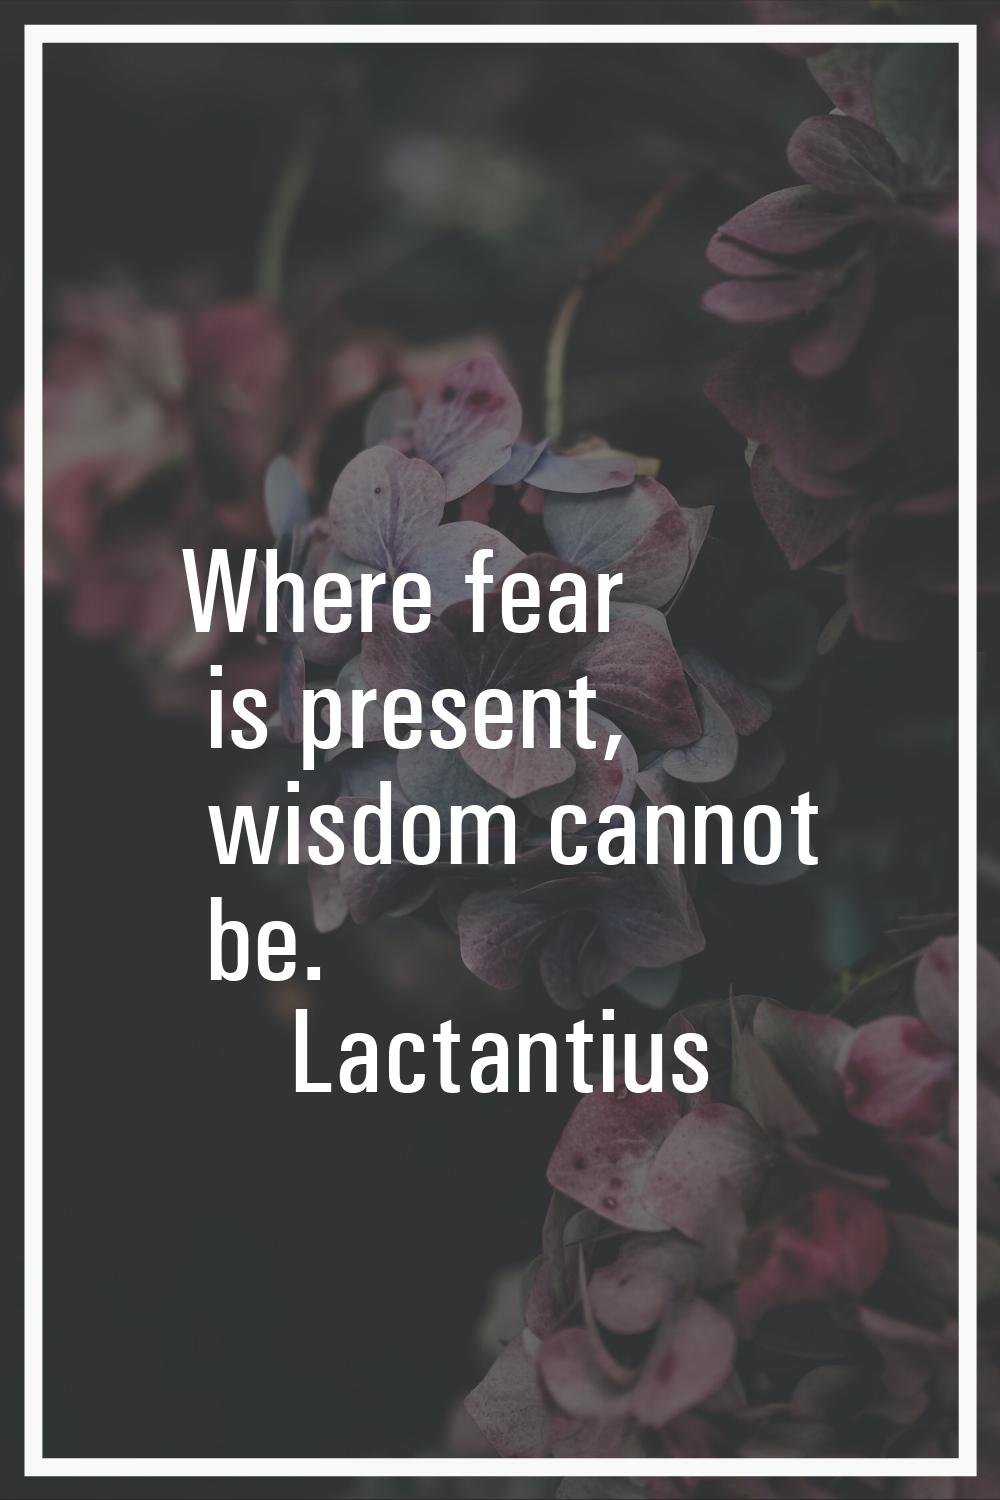 Where fear is present, wisdom cannot be.